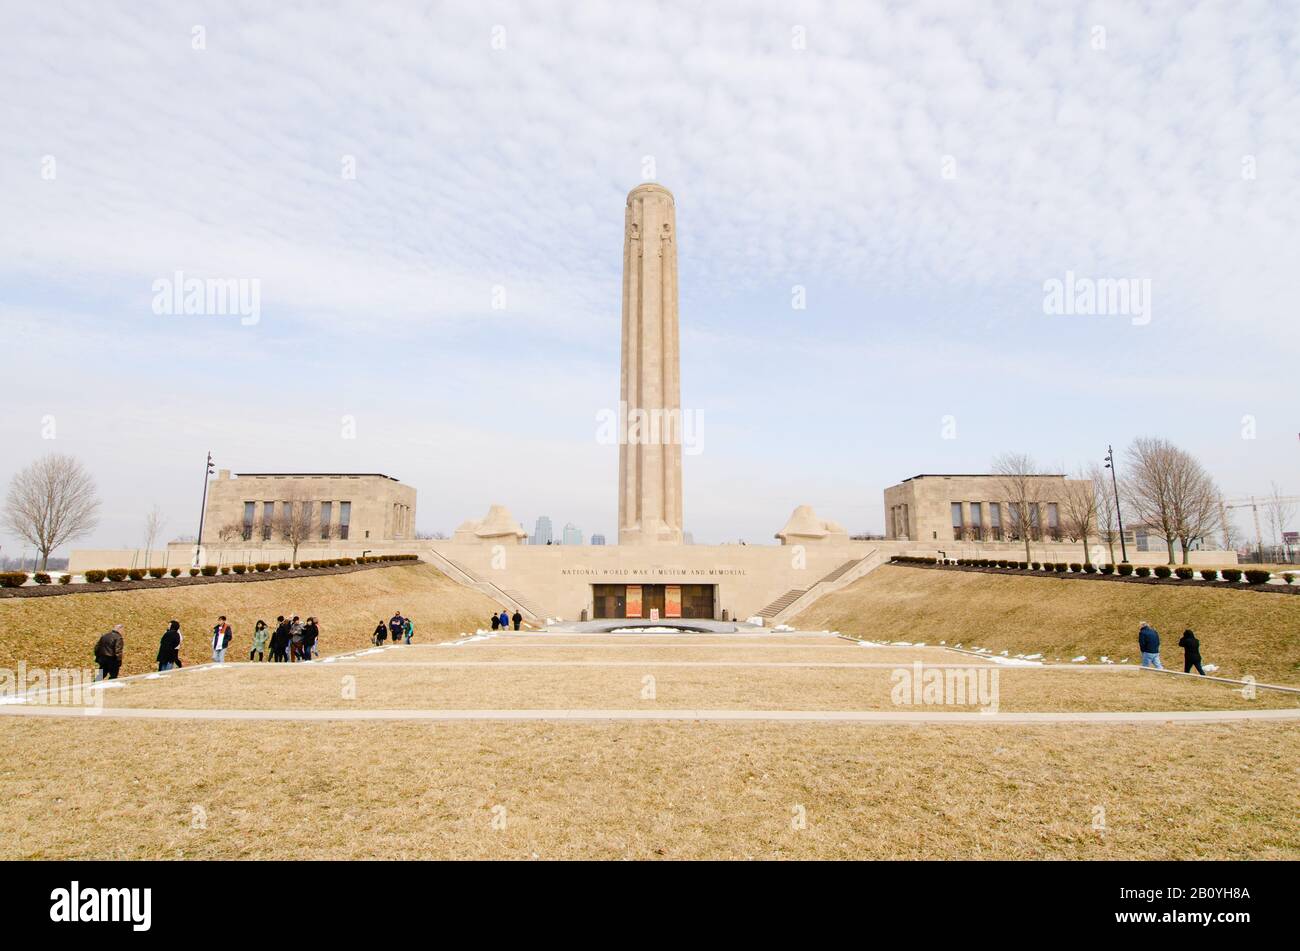 Kansas City, MO - National World war I WWI Museum and Memorial Wide View Stockfoto